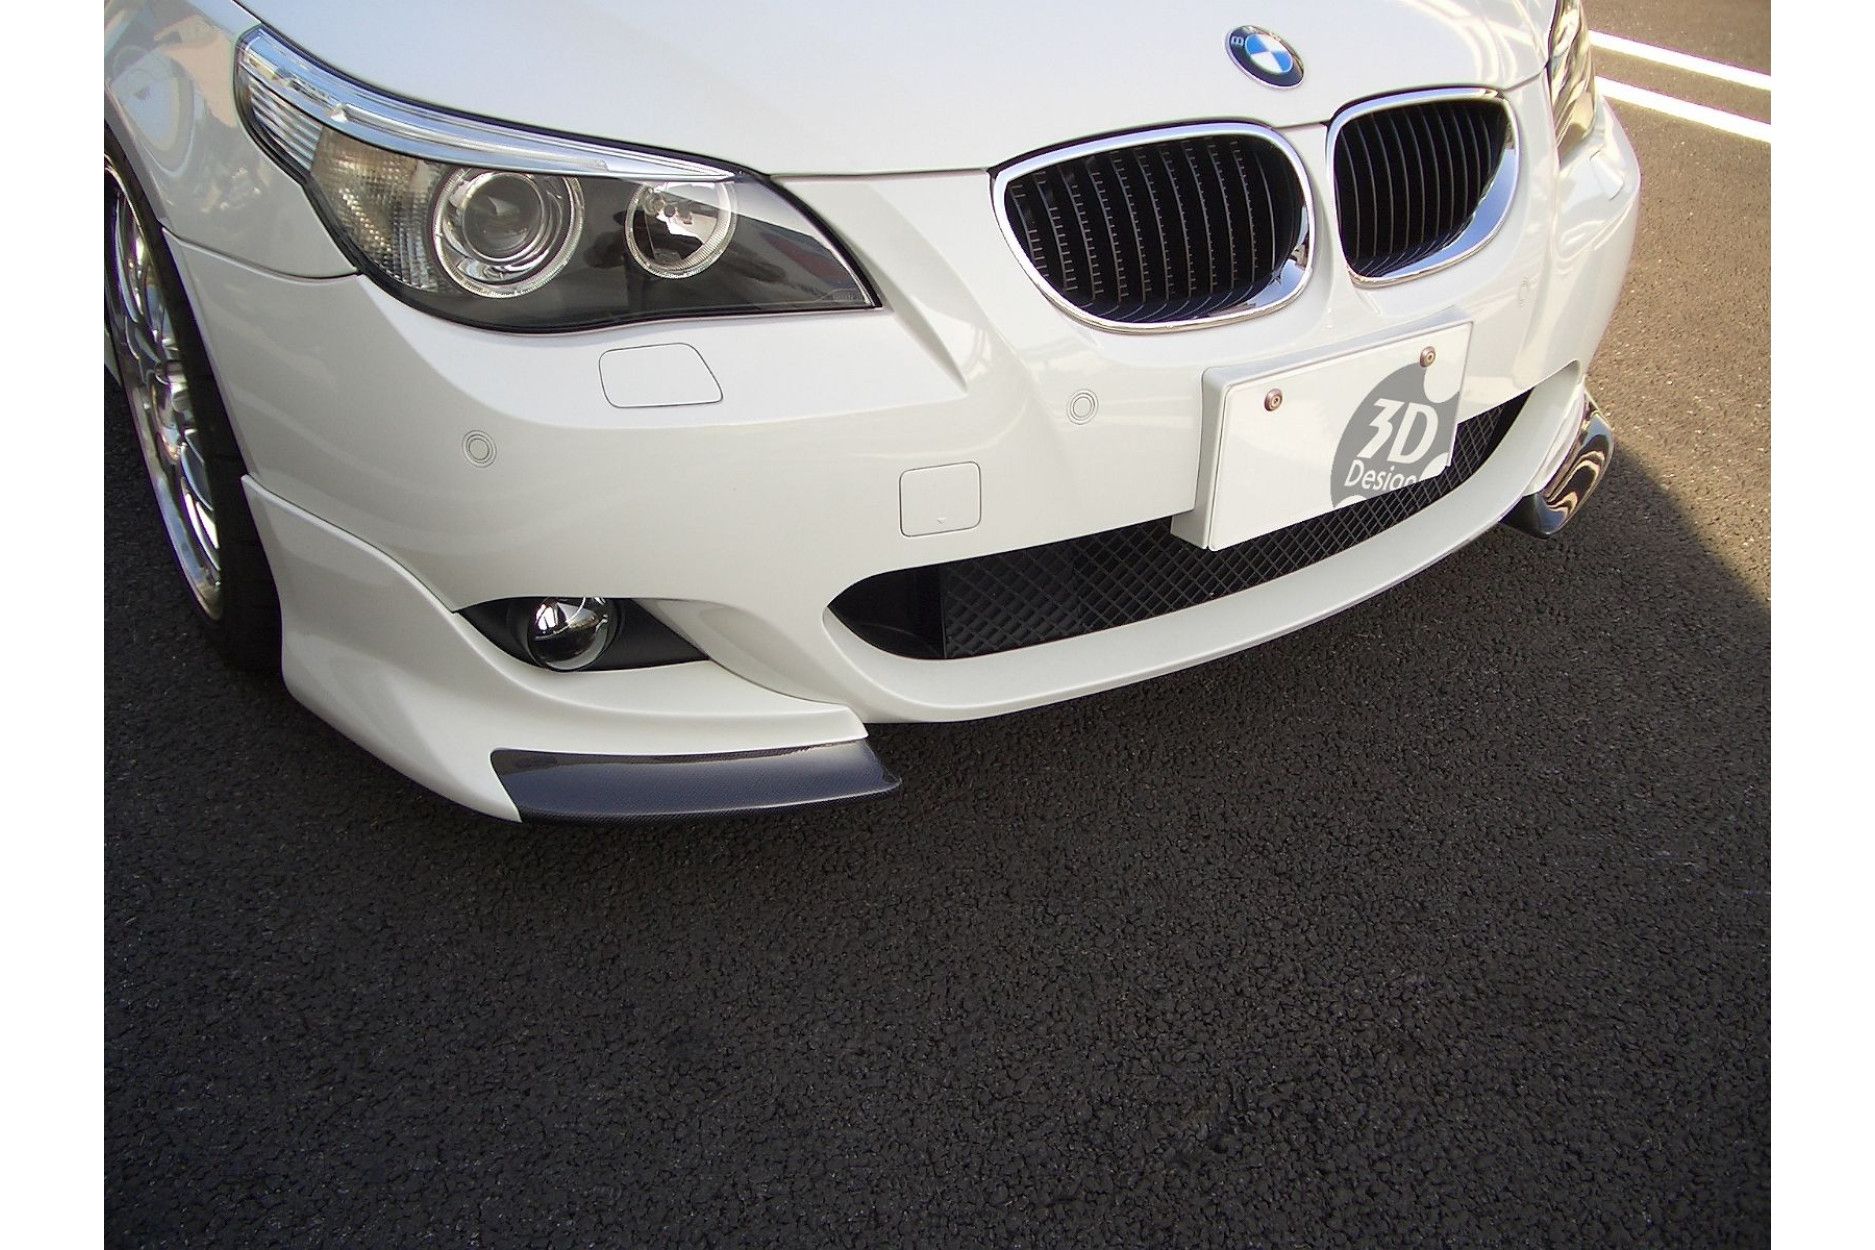 3Ddesign carbon / PUR front splitter fitting for BMW 5 E60 with M-Tech